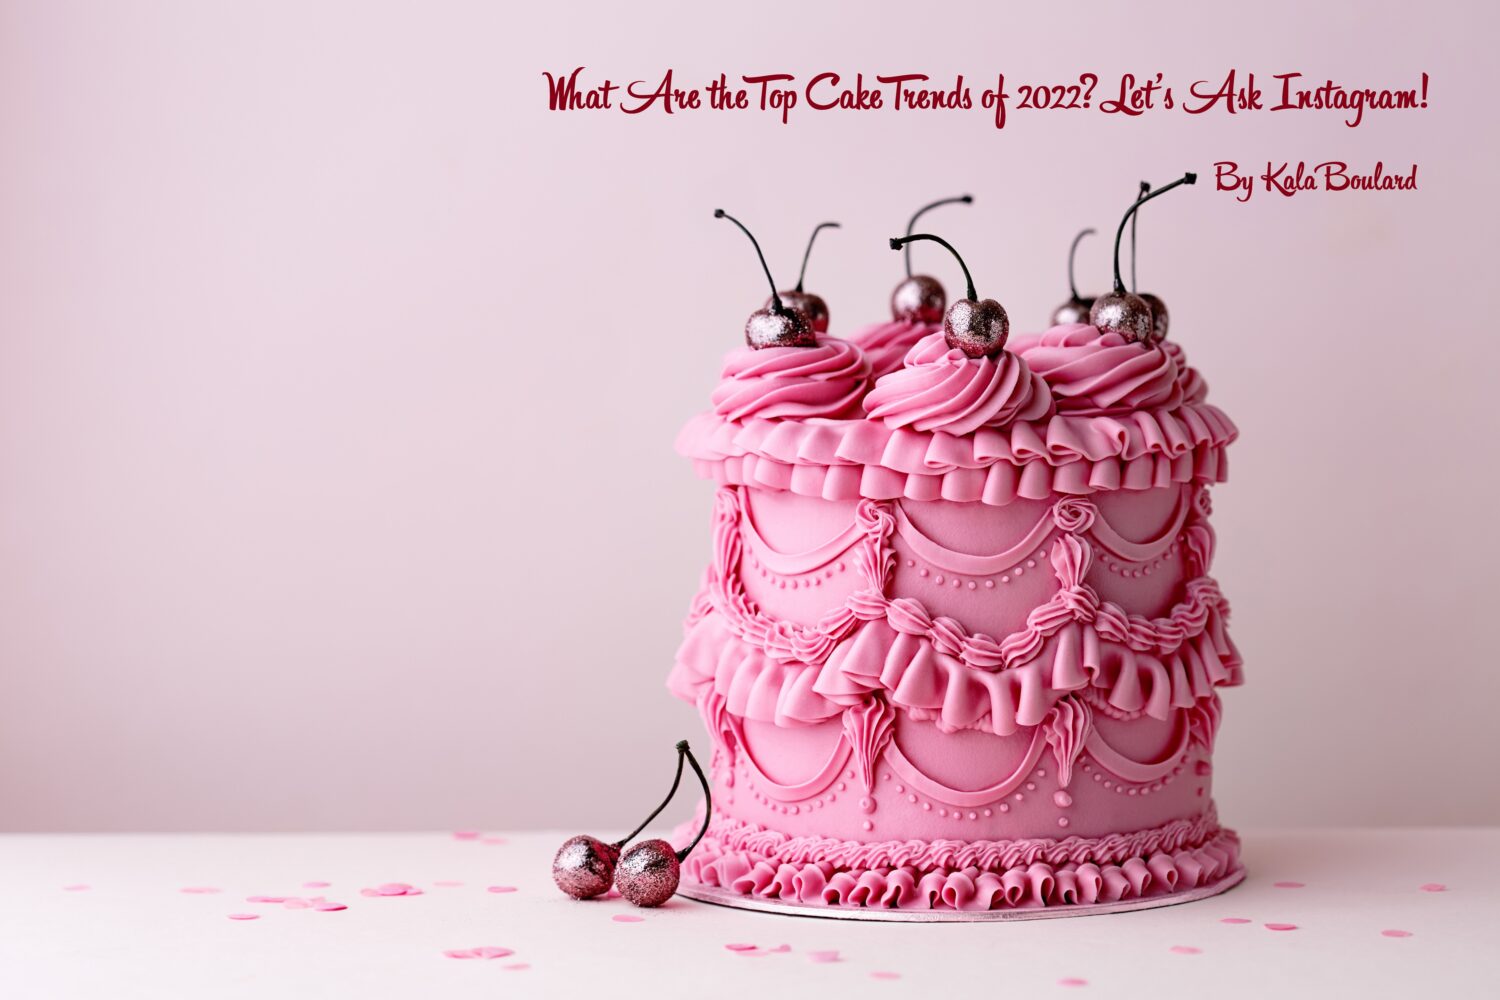 What Are the Top Cake Trends of 2022? Let’s Ask Instagram!